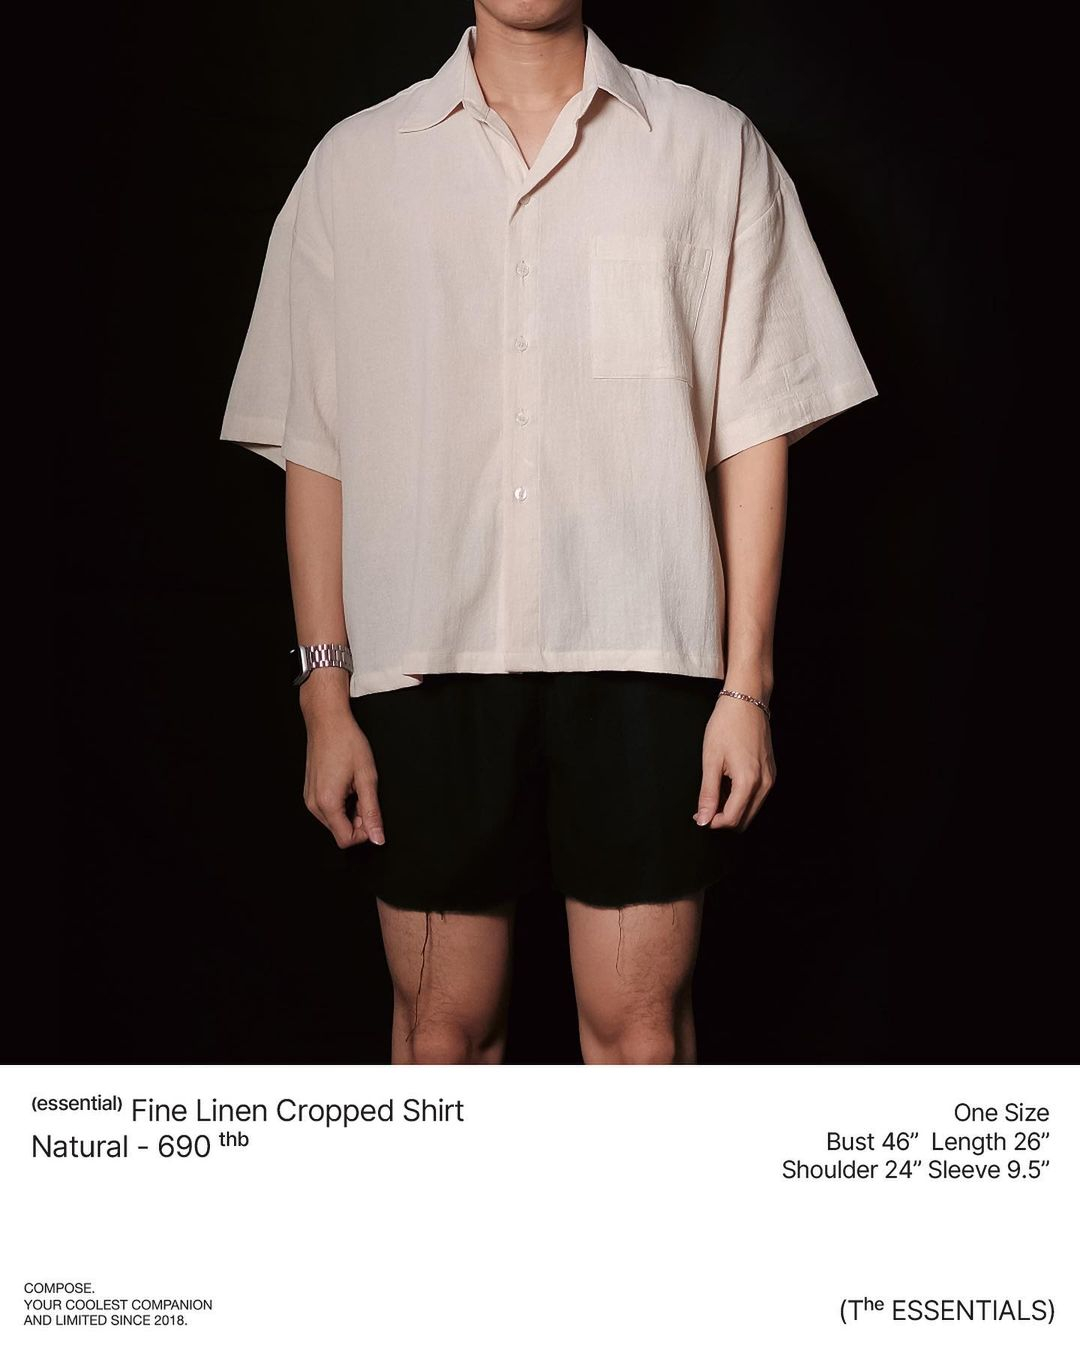 Fine Linen Cropped Shirt in Natural